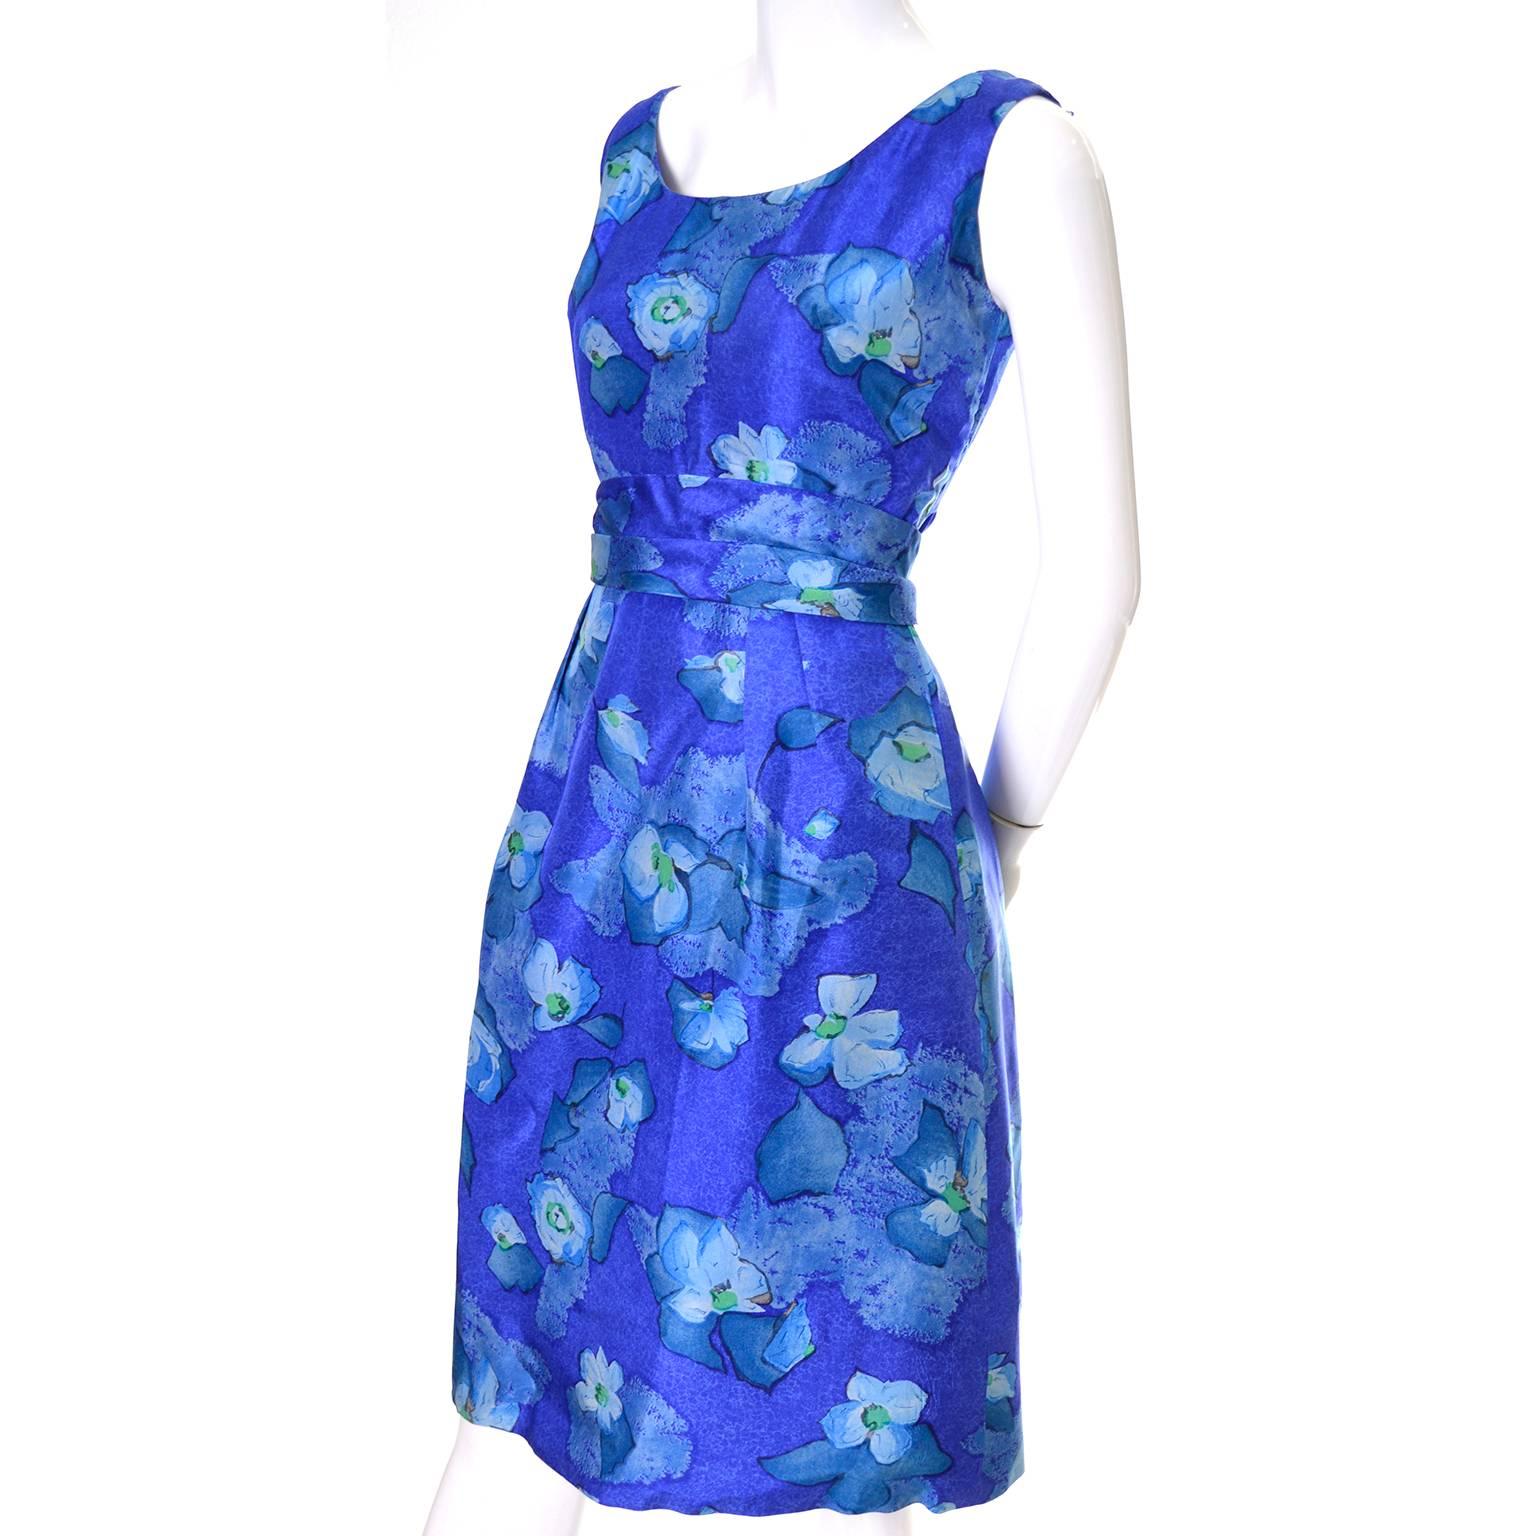 This blue floral vintage cocktail dress was designed in the 1960's by Betty Clyne and was sold at Bergdorf Goodman under the 